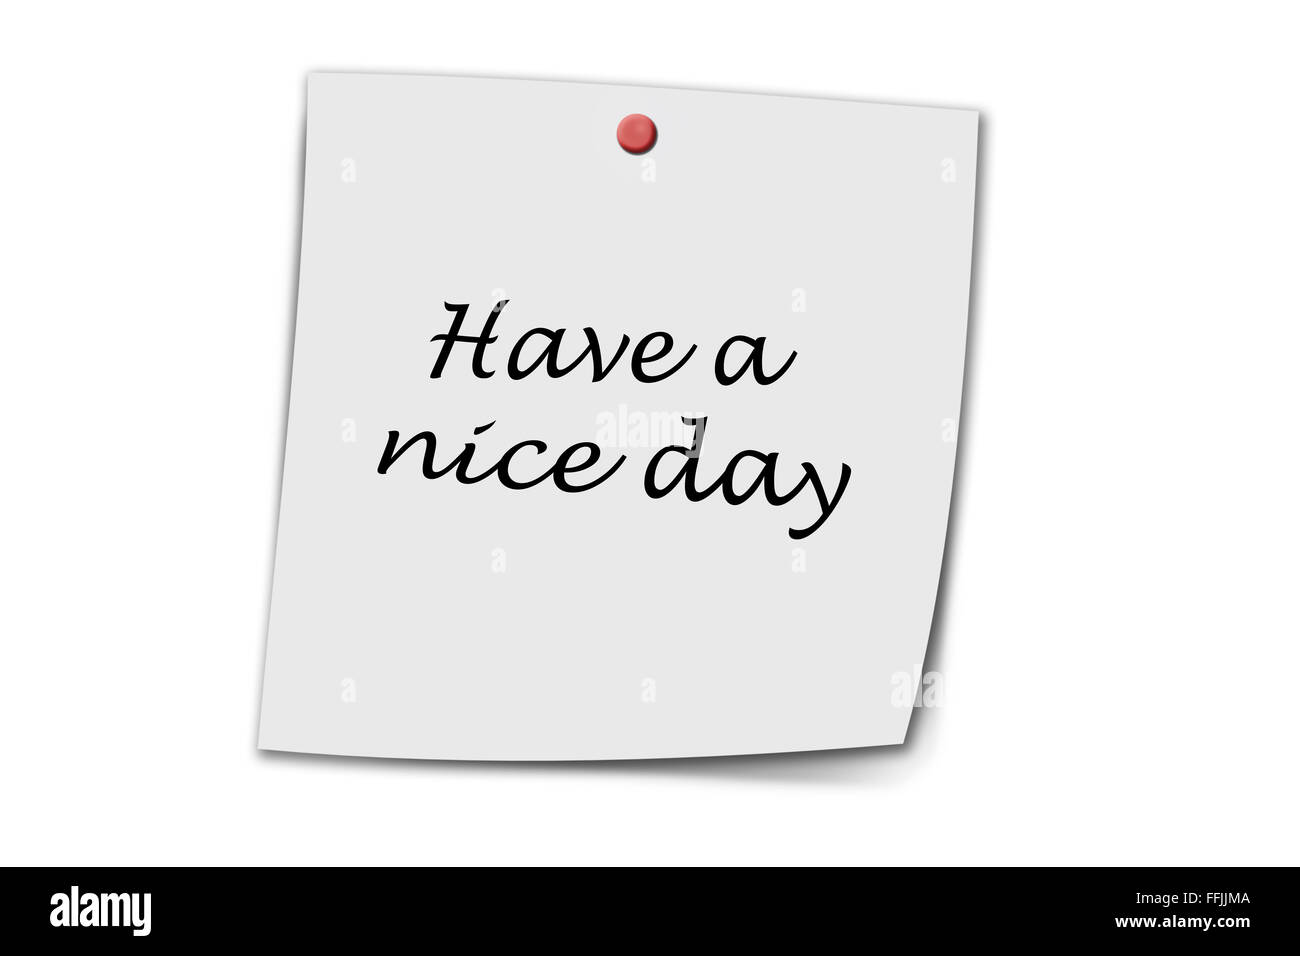 have a nice day written on a memo isolated on white Stock Photo